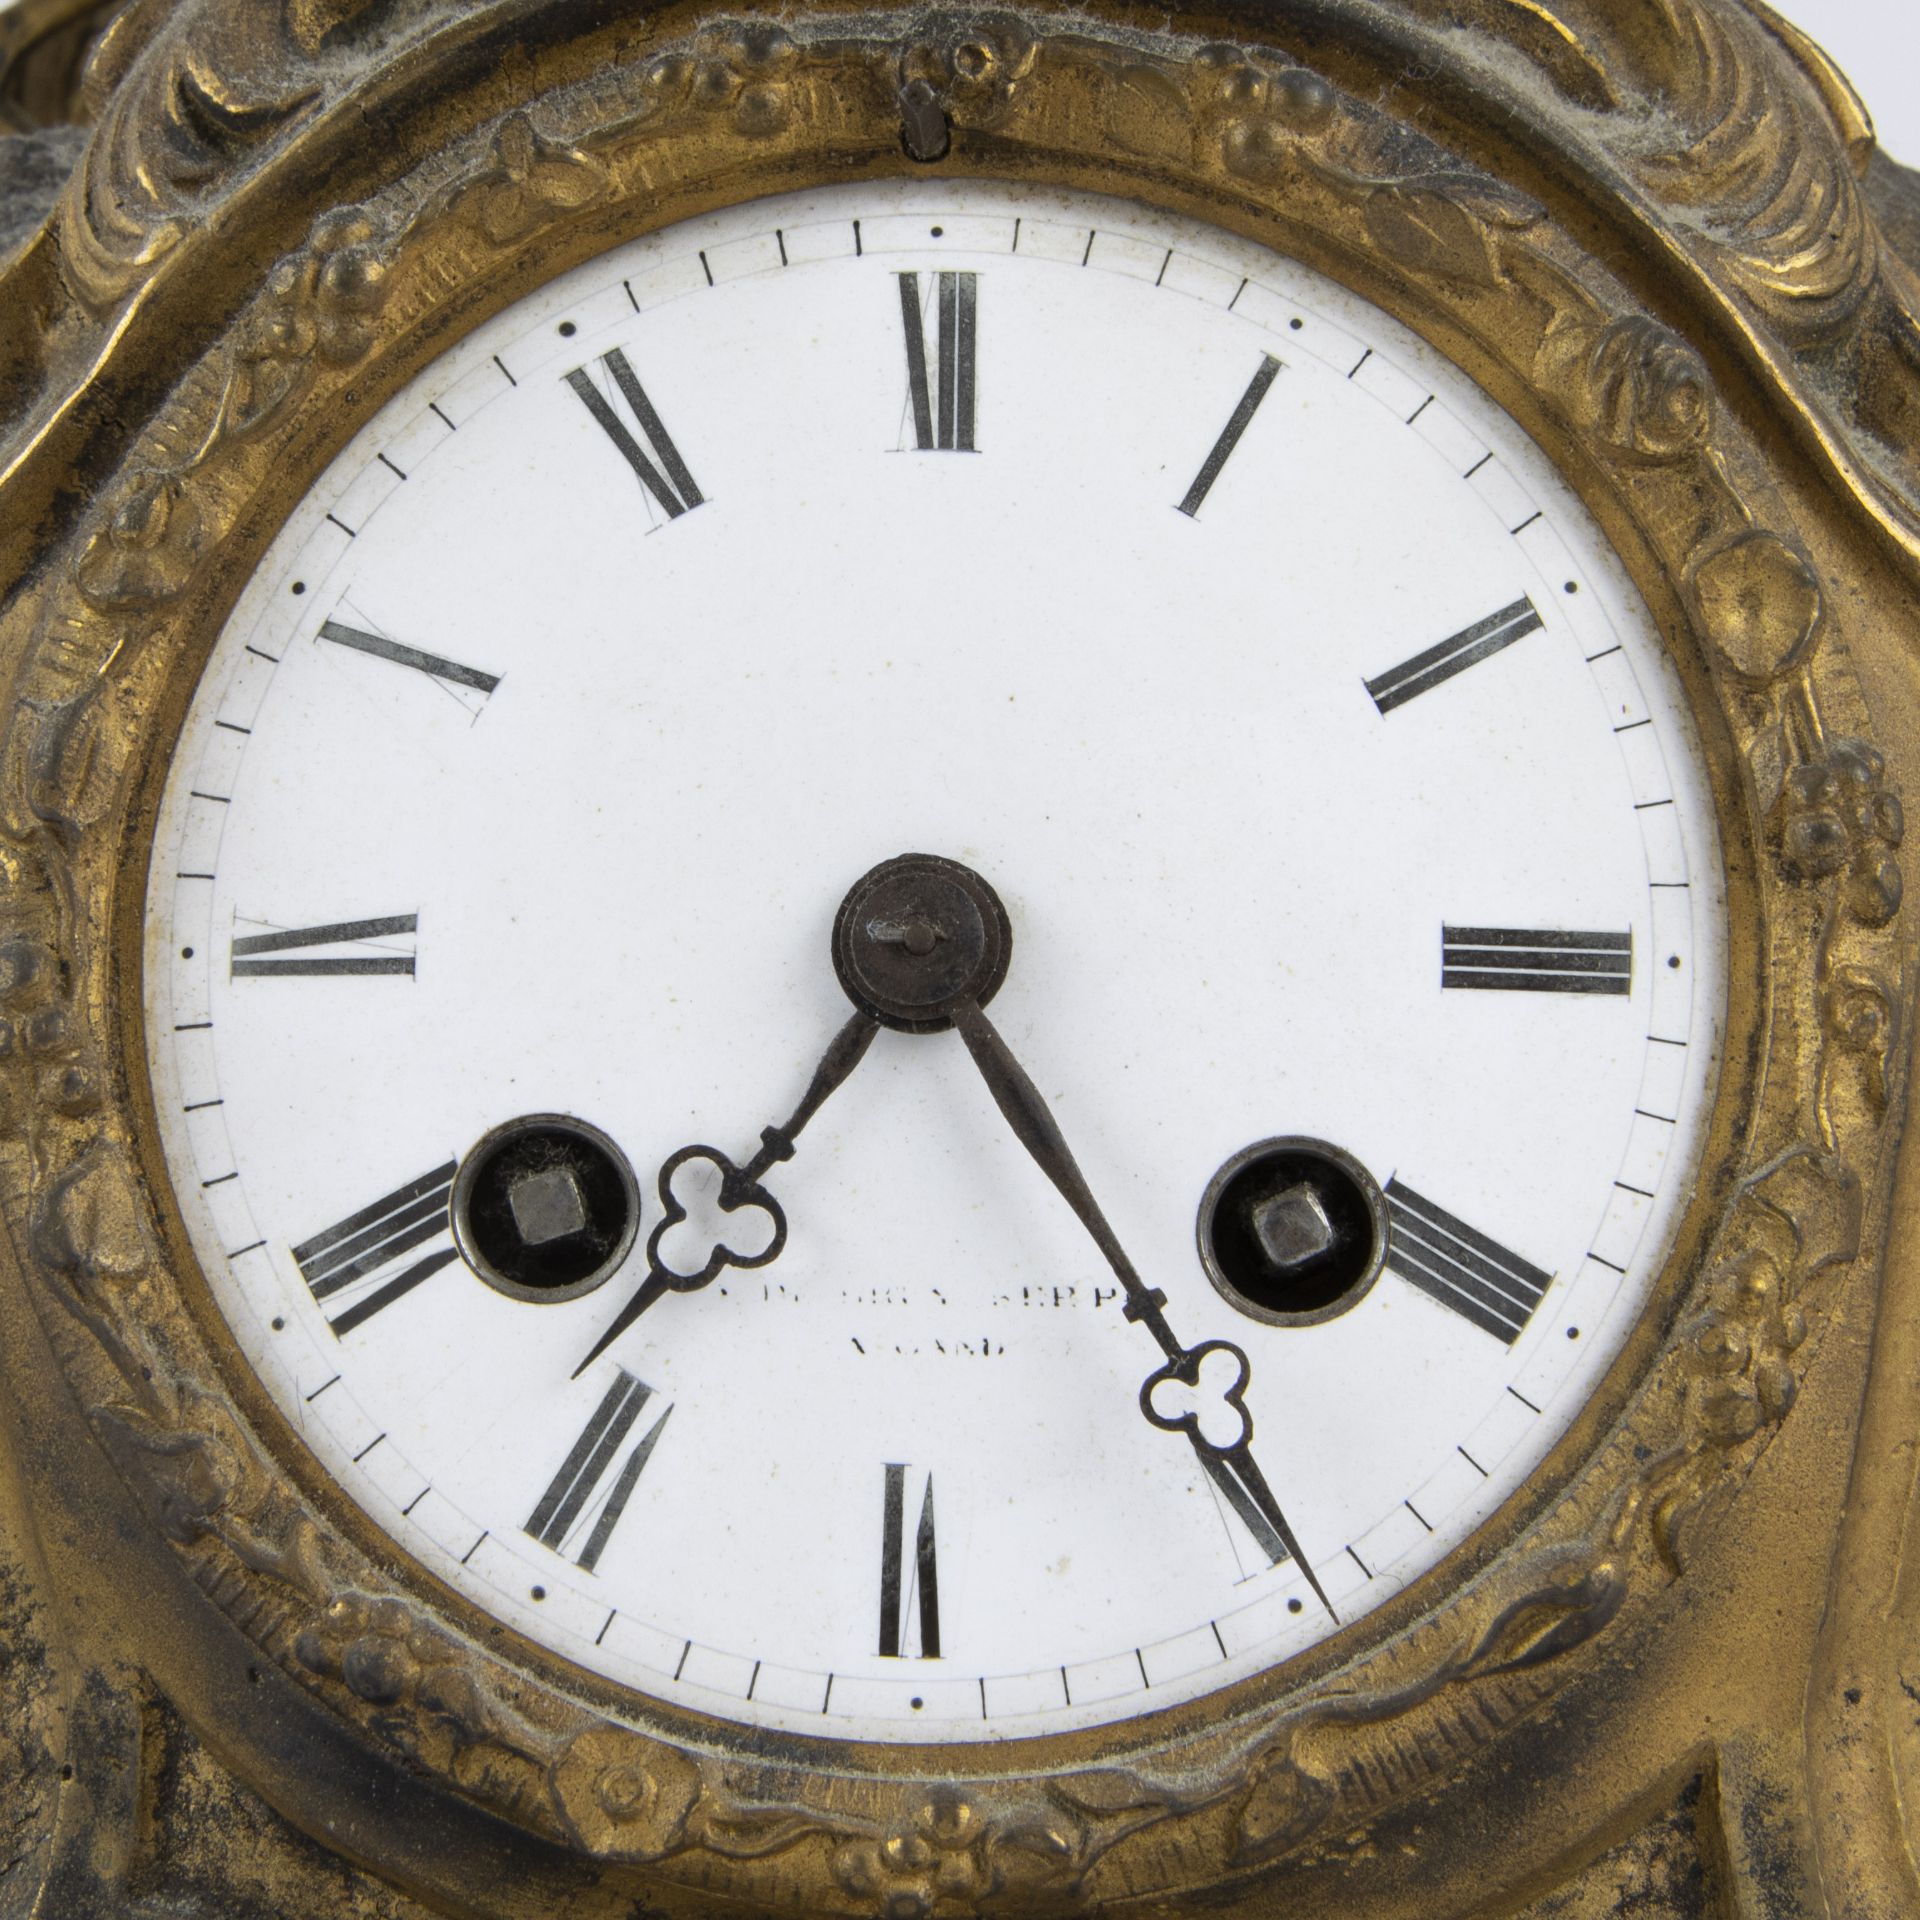 French gold-plated romantic mantel clock with enamel dial in a globe, 2nd half 19th century and Fren - Image 3 of 6